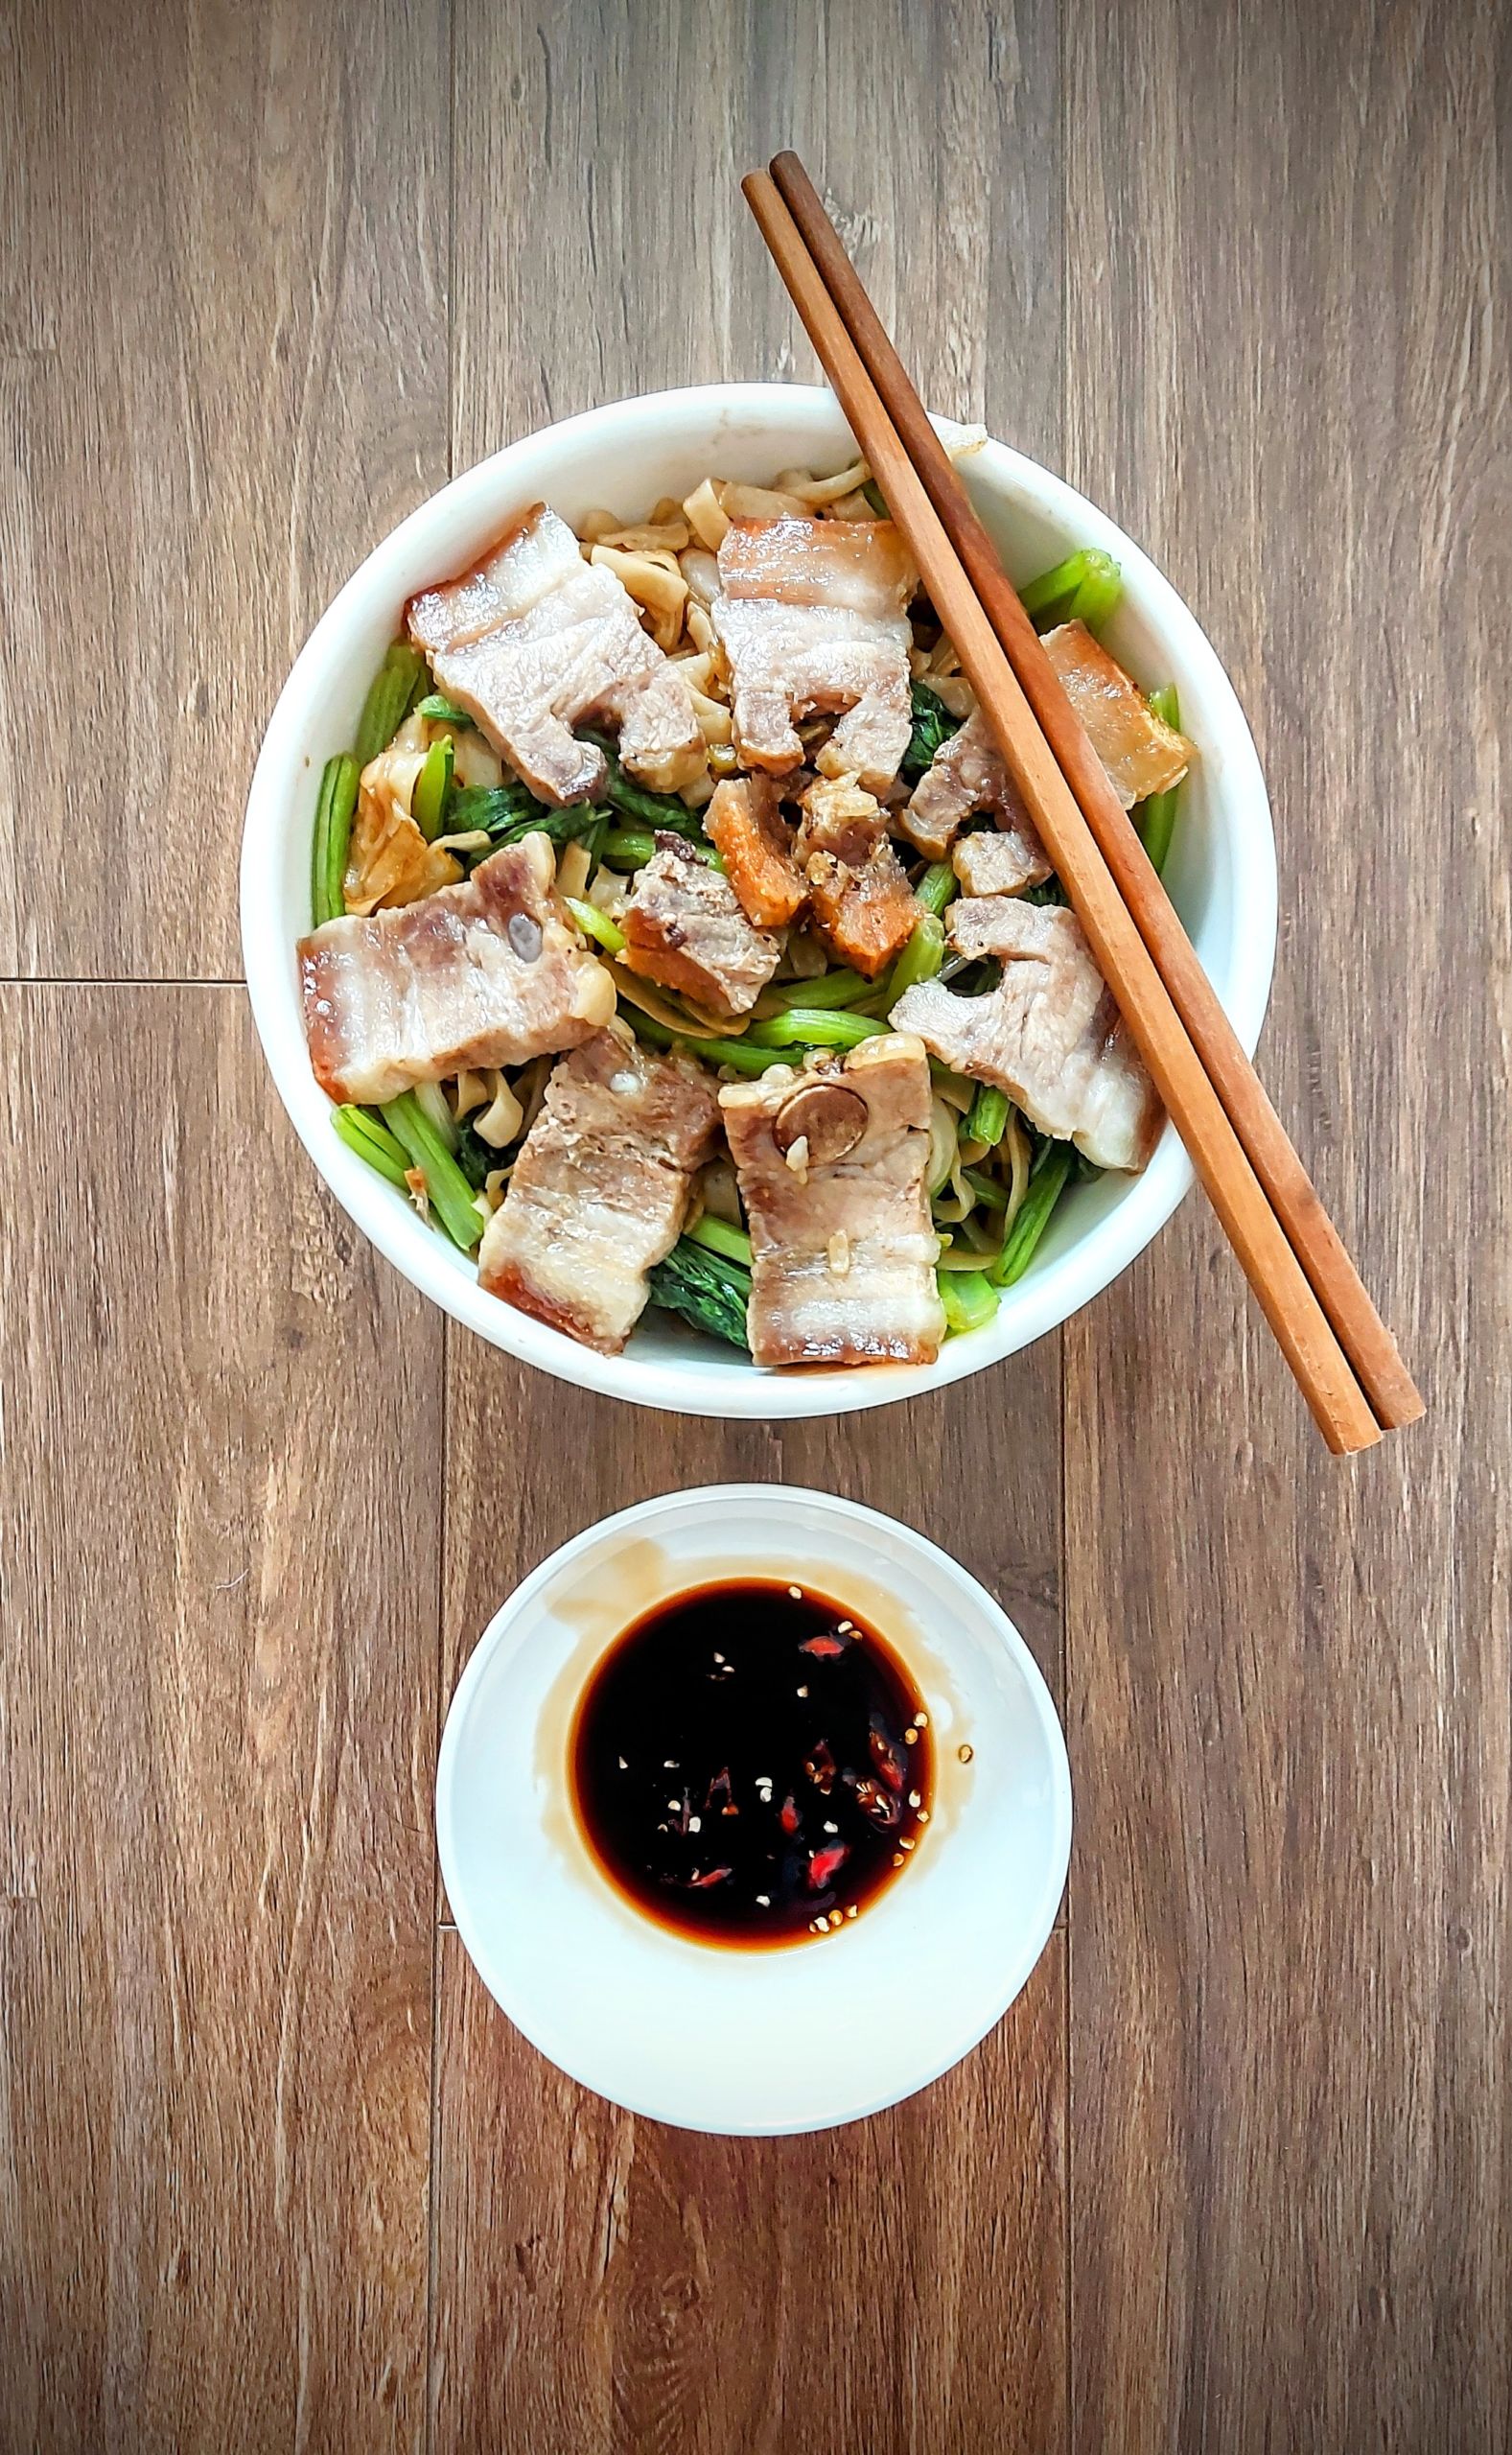 Phở xào - fried noodles with vegetables, pork and soy chili sauce